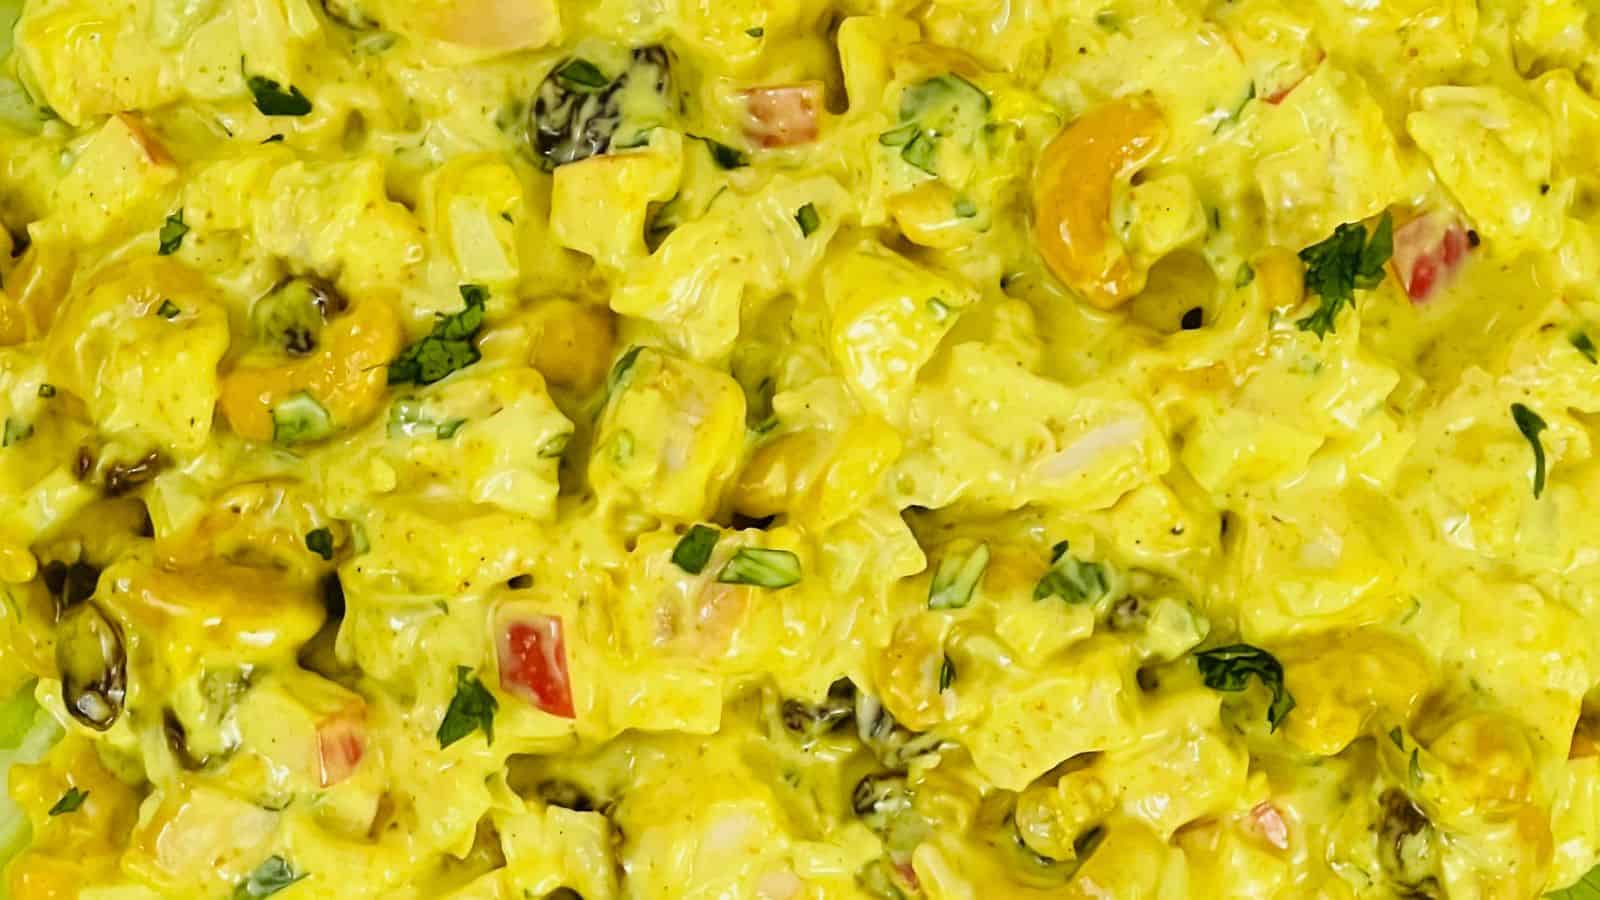 Close-up of a dish featuring a creamy yellow curry with chunks of vegetables, cashews, and raisins, garnished with fresh herbs.